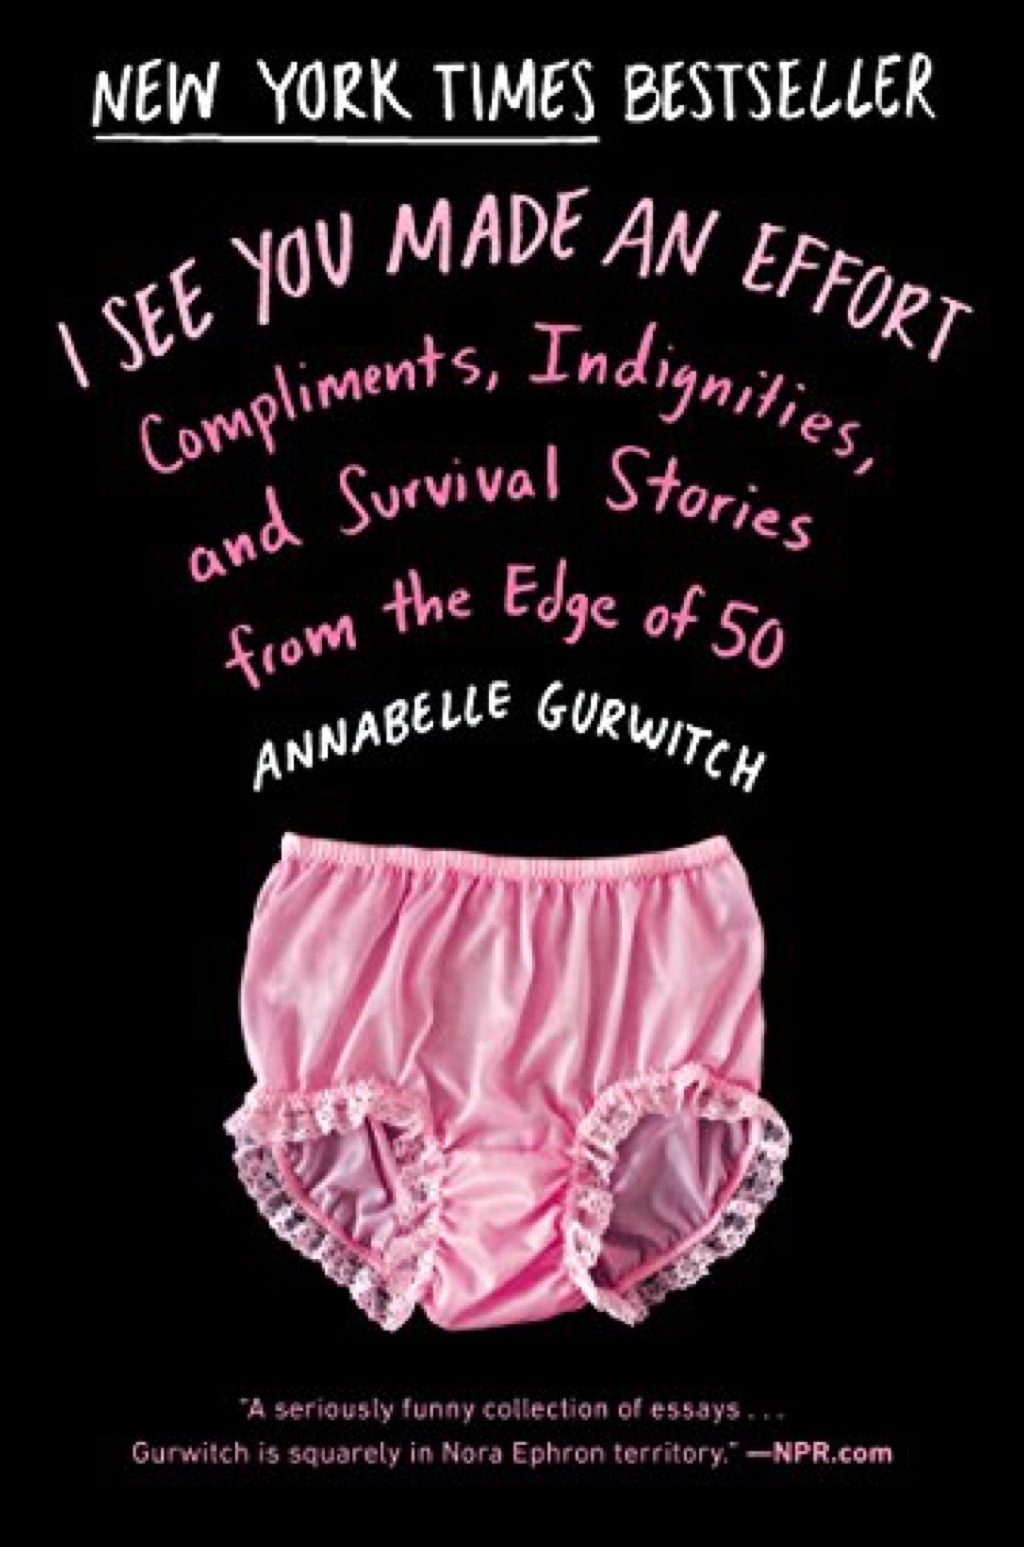 I See You Made an Effort: Compliments, Indignities, and Survival Stories from the Edge of 50 